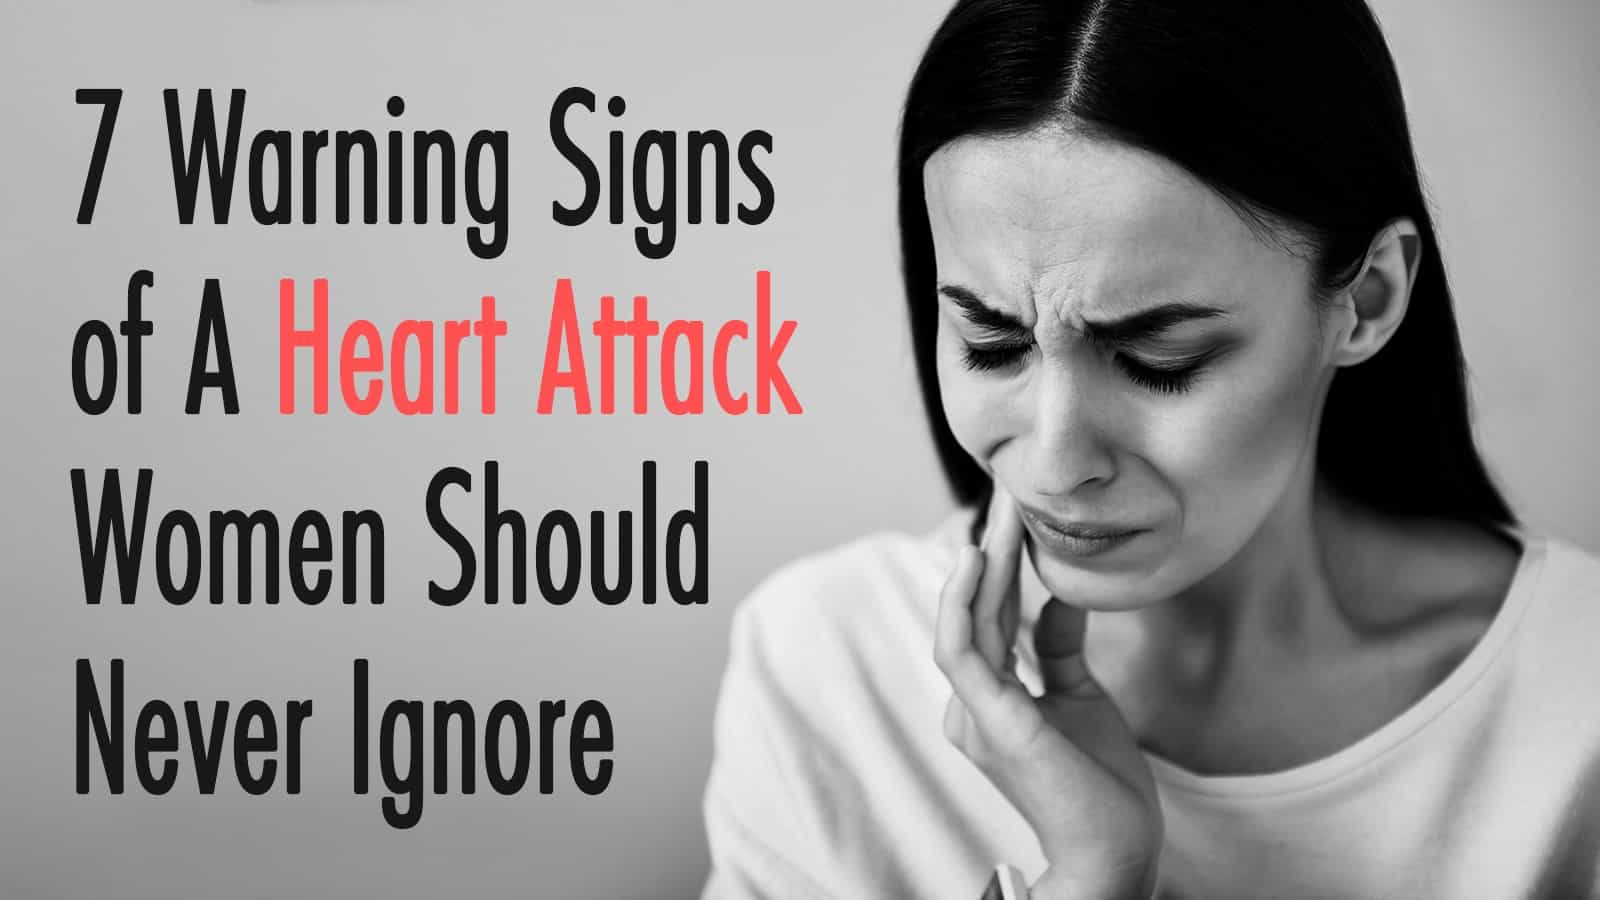 7 Warning Signs of A Heart Attack Women Should Never Ignore